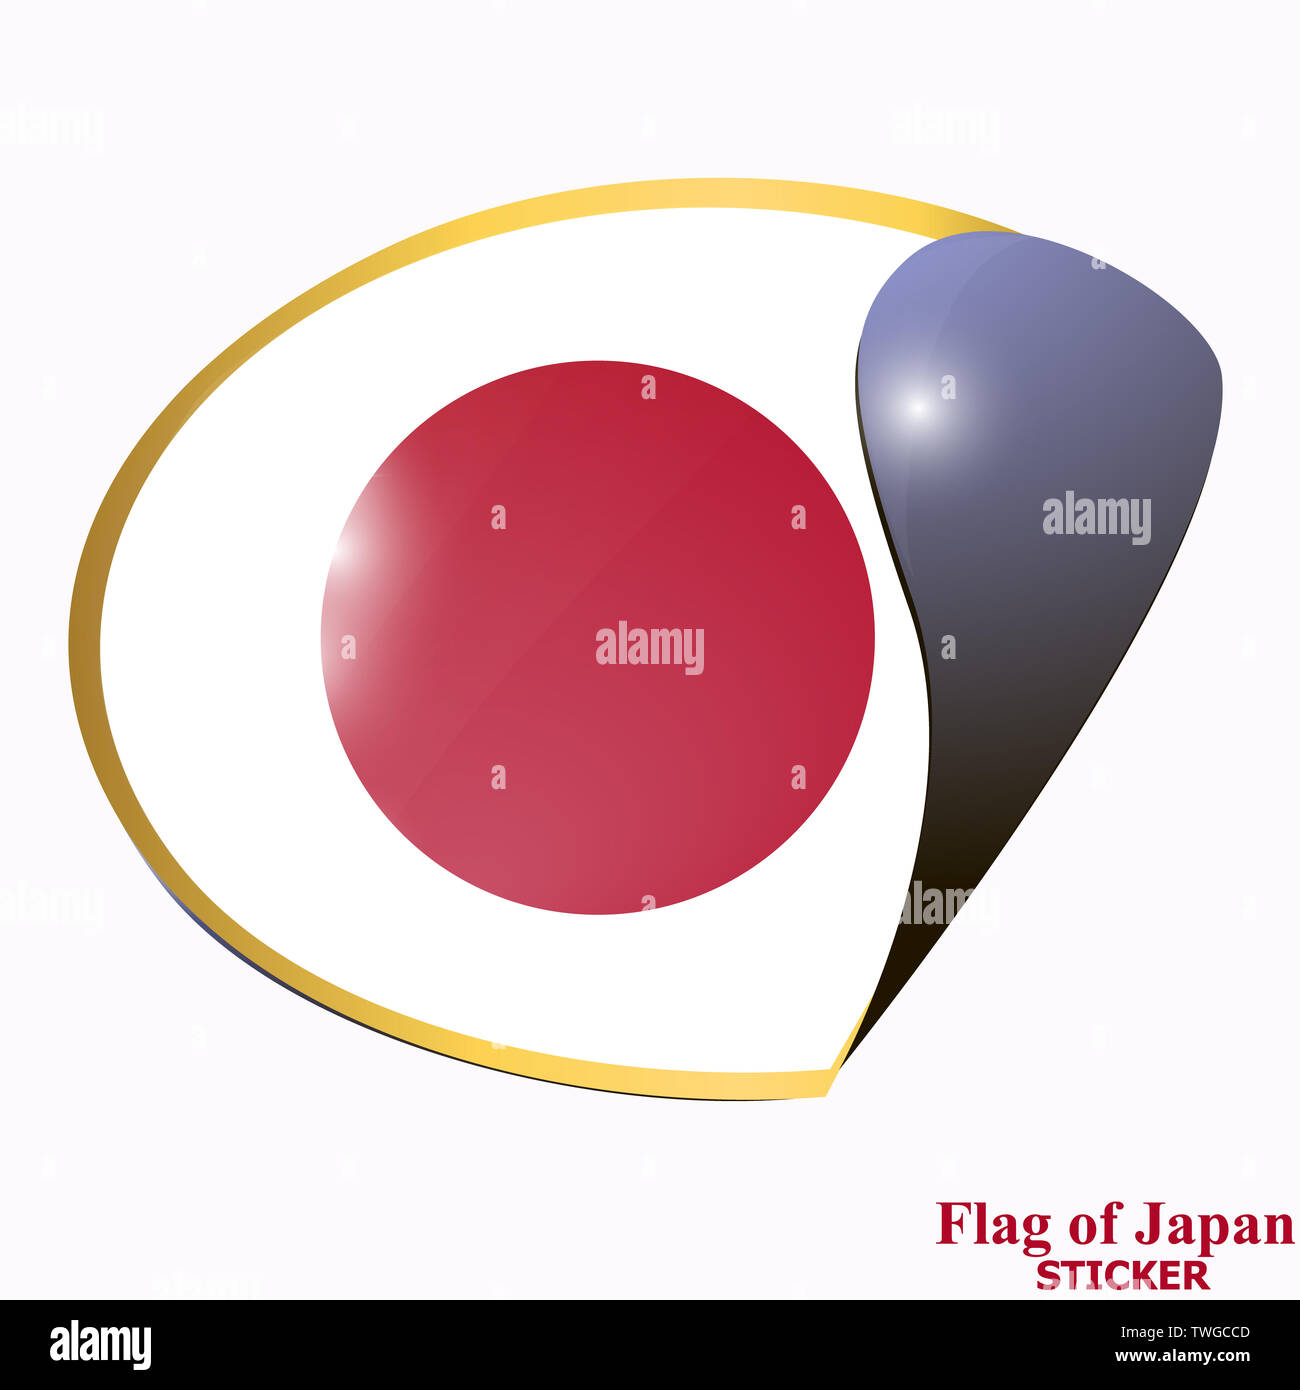 Banner with flag of Japan. Colorful illustration with flags for web design. Illustration with white background. Stock Photo